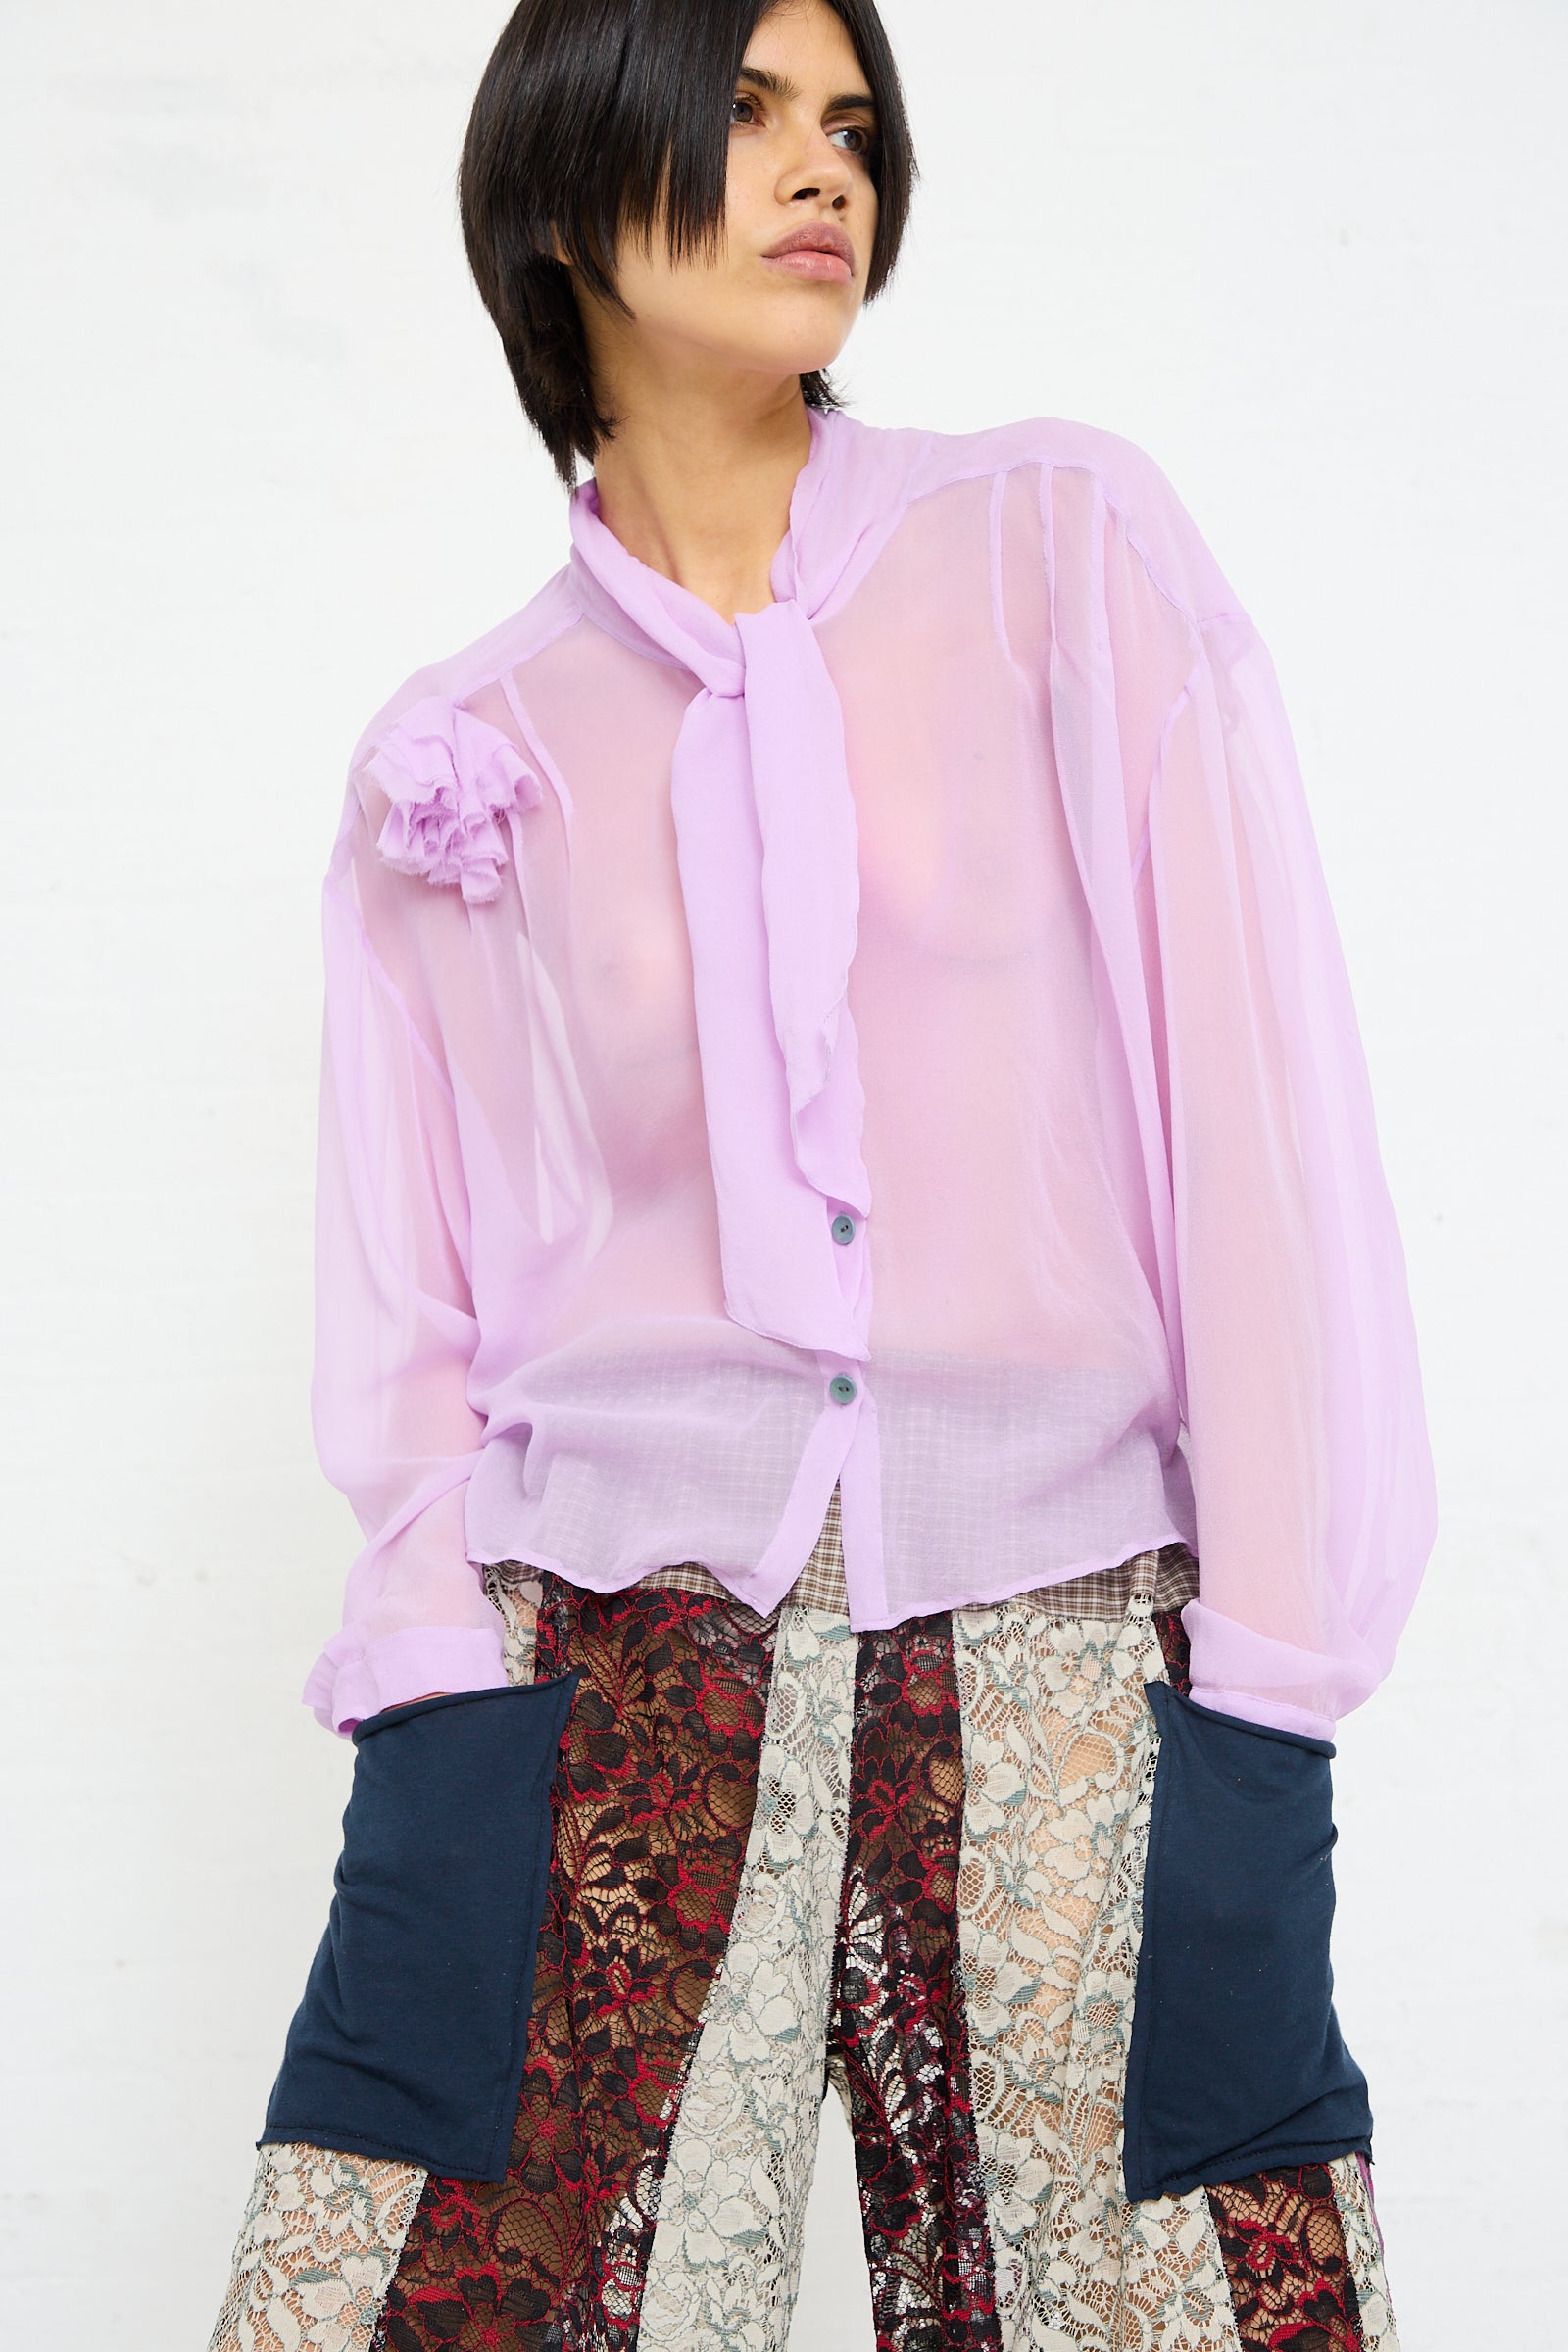 A person stands against a white background, wearing a SC103 Silk Chiffon Mandolin Blouse in Sash with rosette detail and patterned trousers.